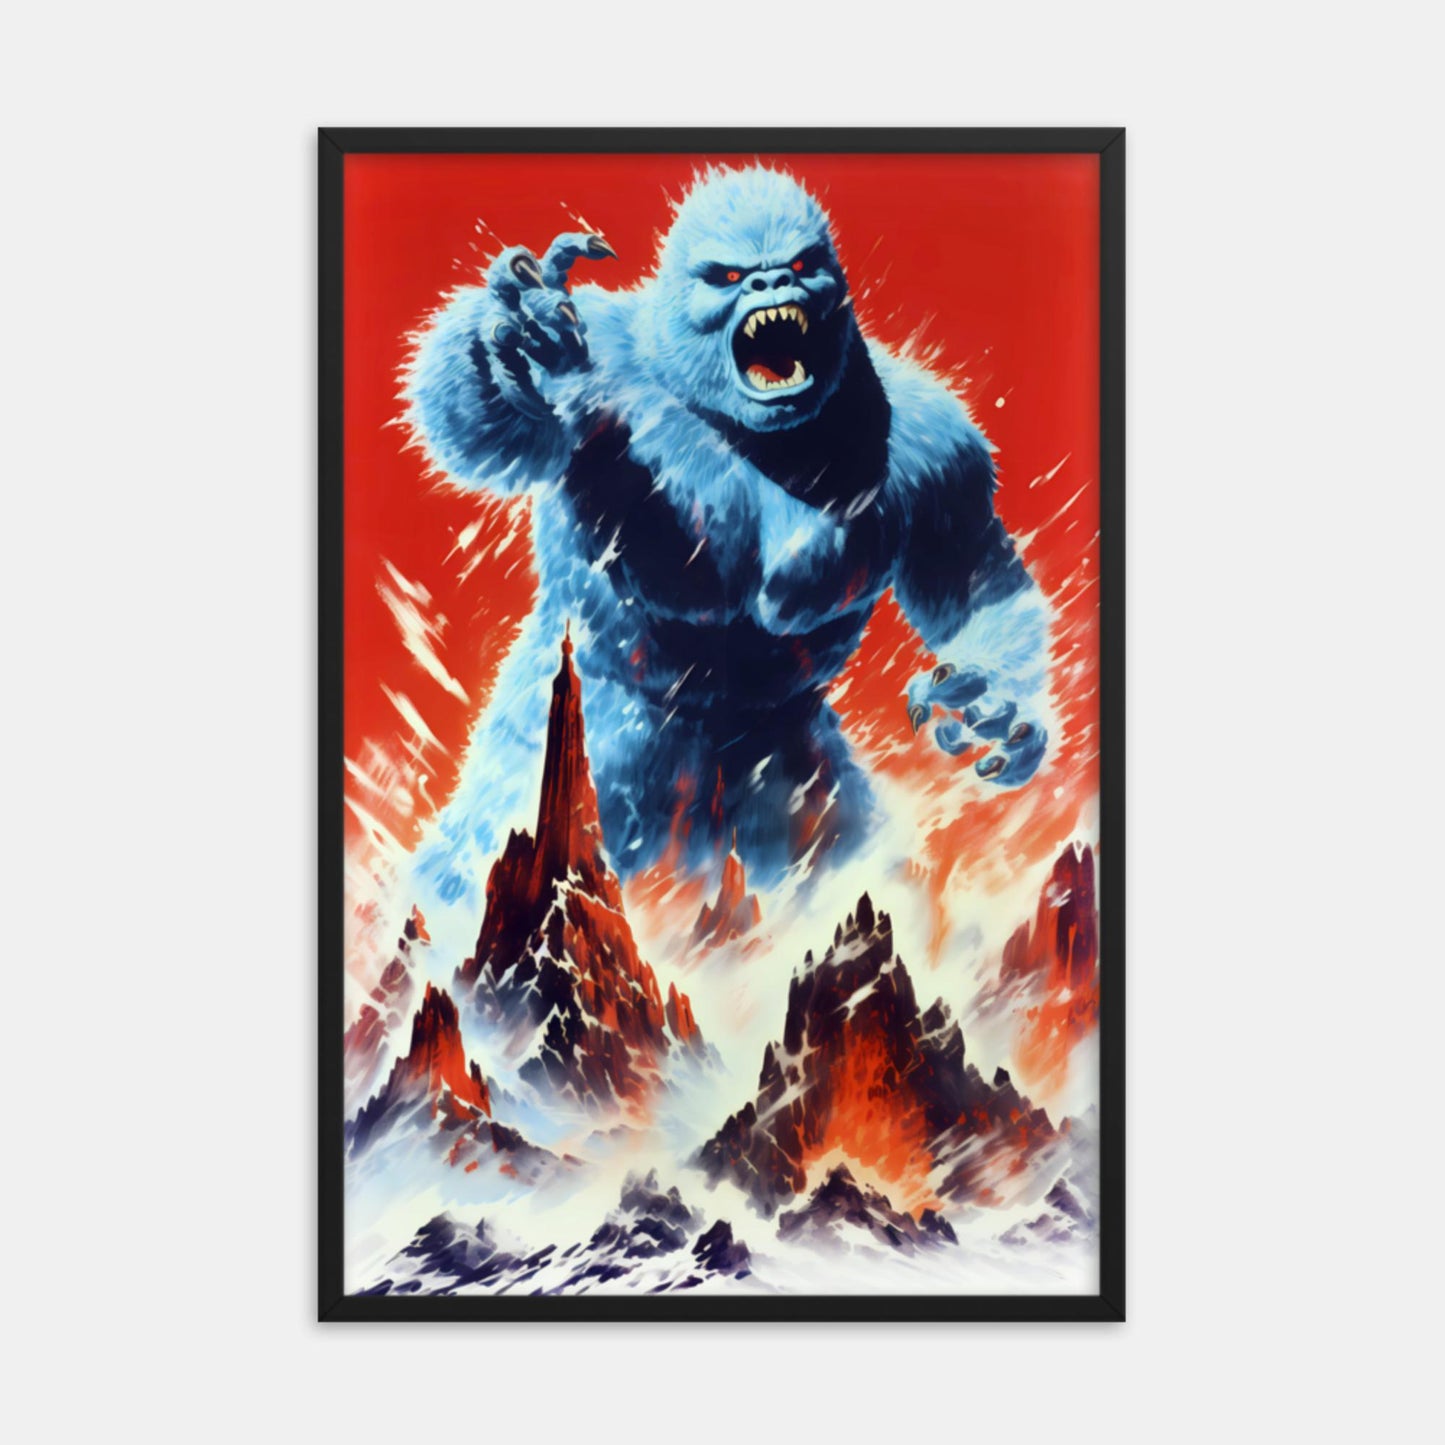 The Abominable Snowman Framed Print